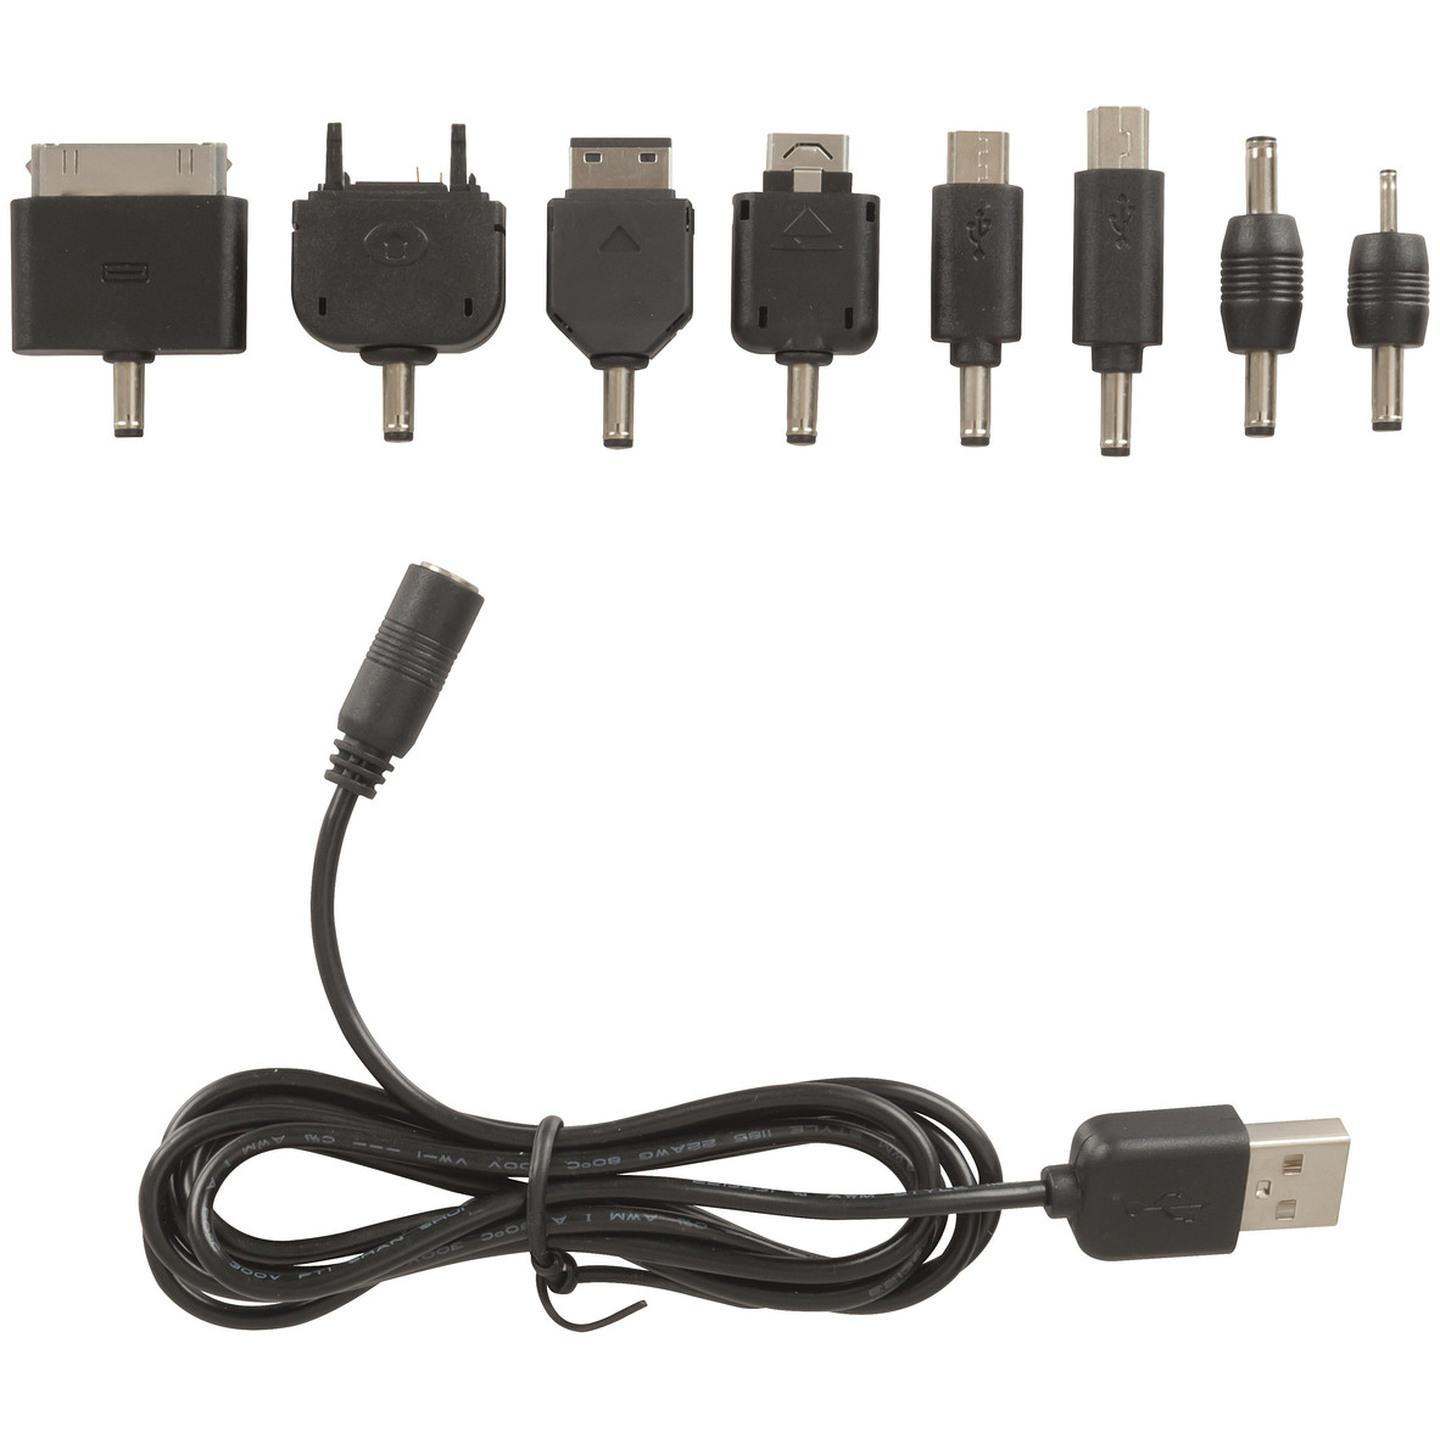 Universal USB Phone Cable with 8 Plugs